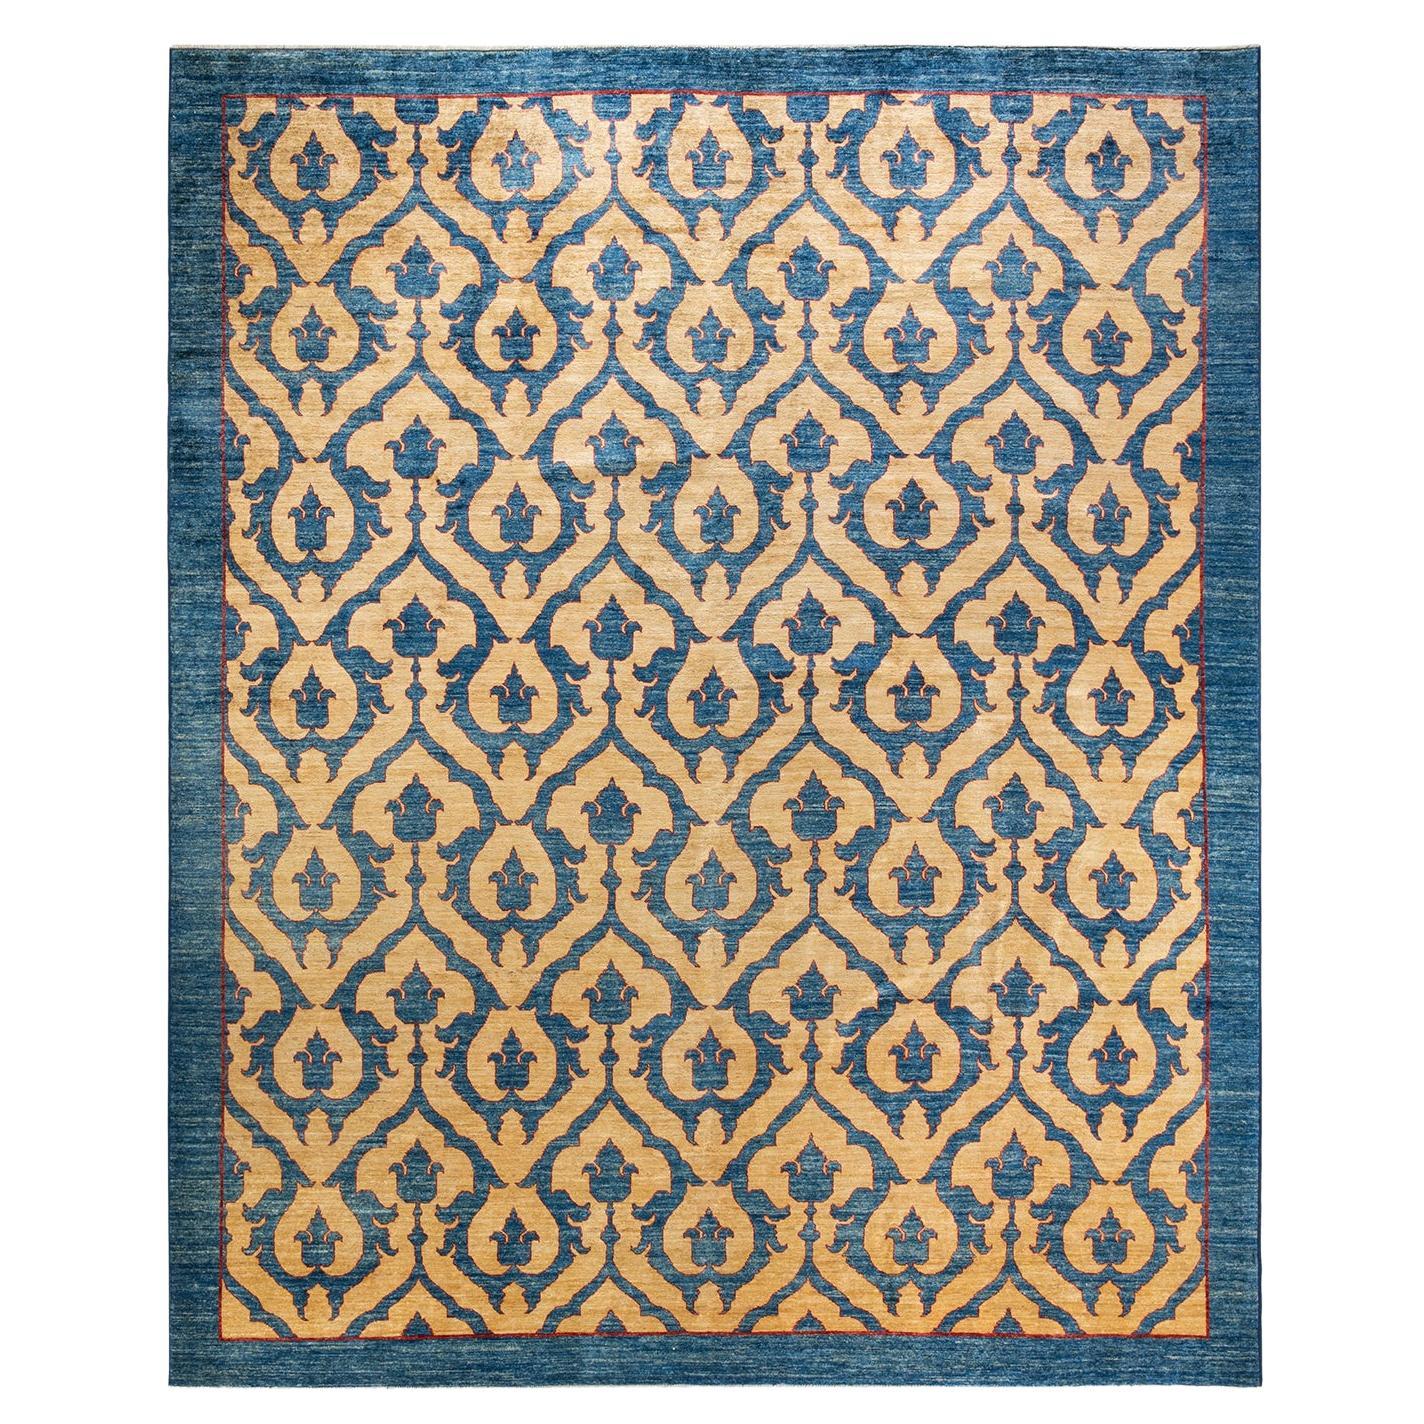 Contemporary Eclectic Handknotted Wool Blue Area Rug